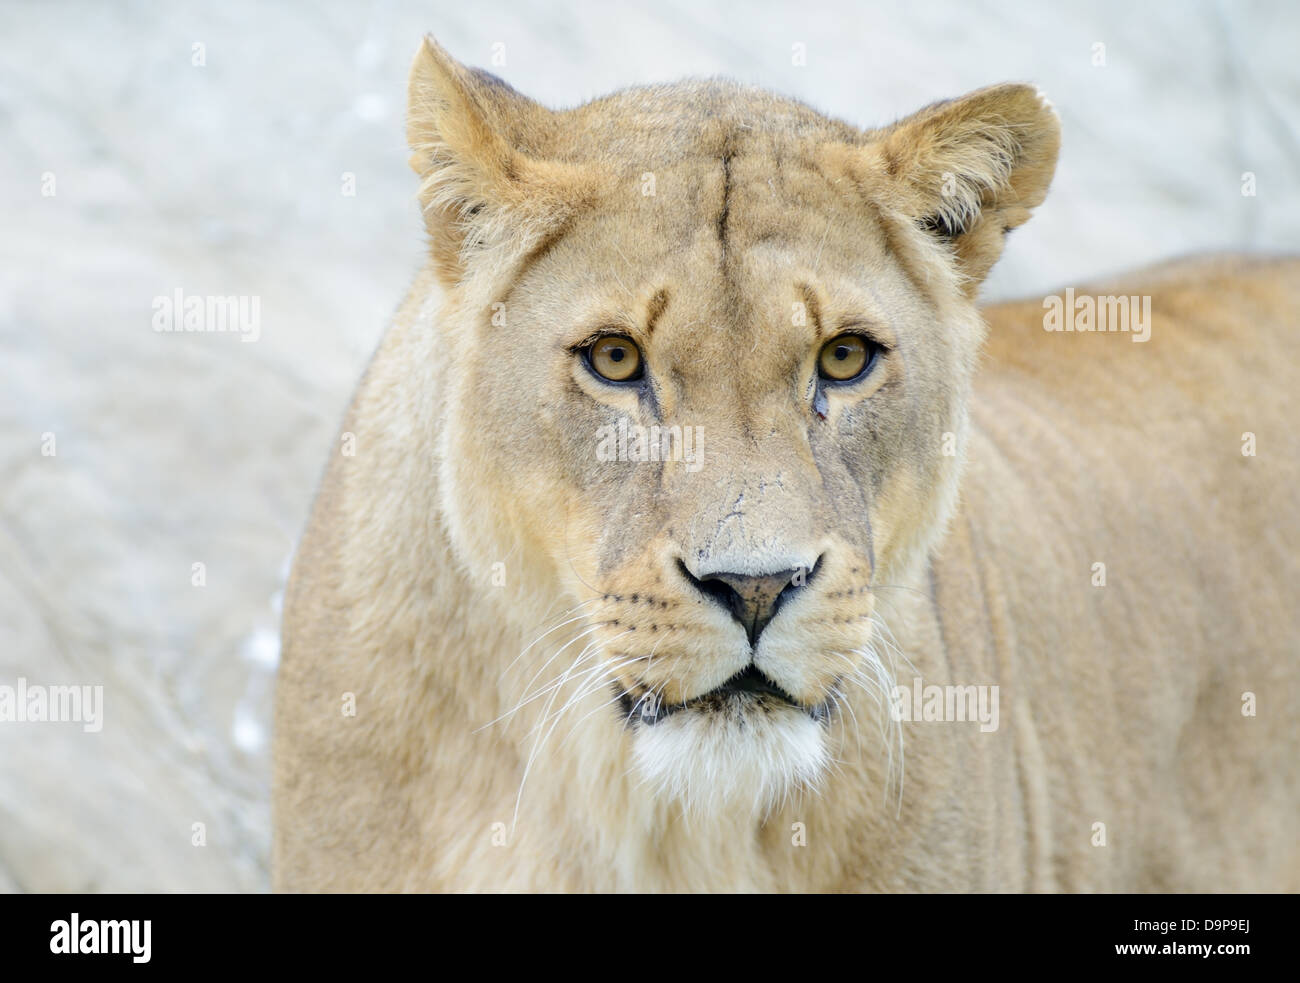 Lioness closeup of head and face staring and looking dangerous Stock Photo